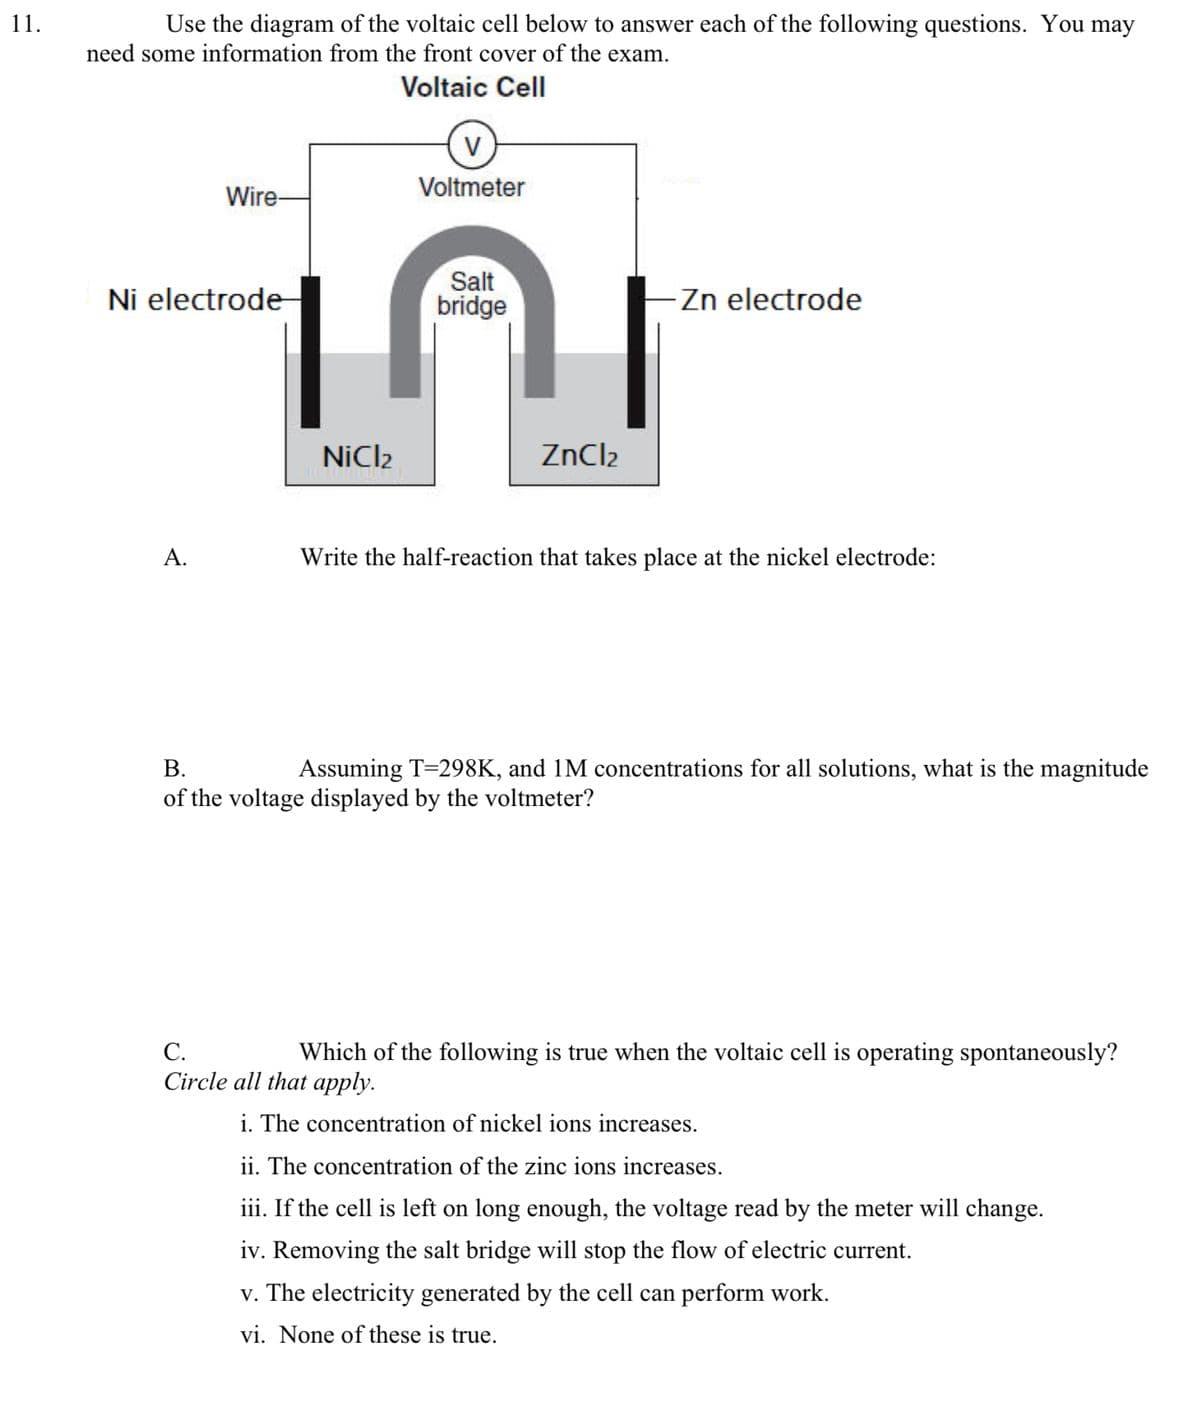 11.
Use the diagram of the voltaic cell below to answer each of the following questions. You may
need some information from the front cover of the exam.
Voltaic Cell
V
Voltmeter
Wire-
Ni electrode-
Salt
bridge
-Zn electrode
A.
NiCl2
ZnCl2
Write the half-reaction that takes place at the nickel electrode:
B.
Assuming T=298K, and 1M concentrations for all solutions, what is the magnitude
of the voltage displayed by the voltmeter?
C.
Which of the following true when the voltaic cell is operating spontaneously?
Circle all that apply.
i. The concentration of nickel ions increases.
ii. The concentration of the zinc ions increases.
iii. If the cell is left on long enough, the voltage read by the meter will change.
iv. Removing the salt bridge will stop the flow of electric current.
v. The electricity generated by the cell can perform work.
vi. None of these is true.